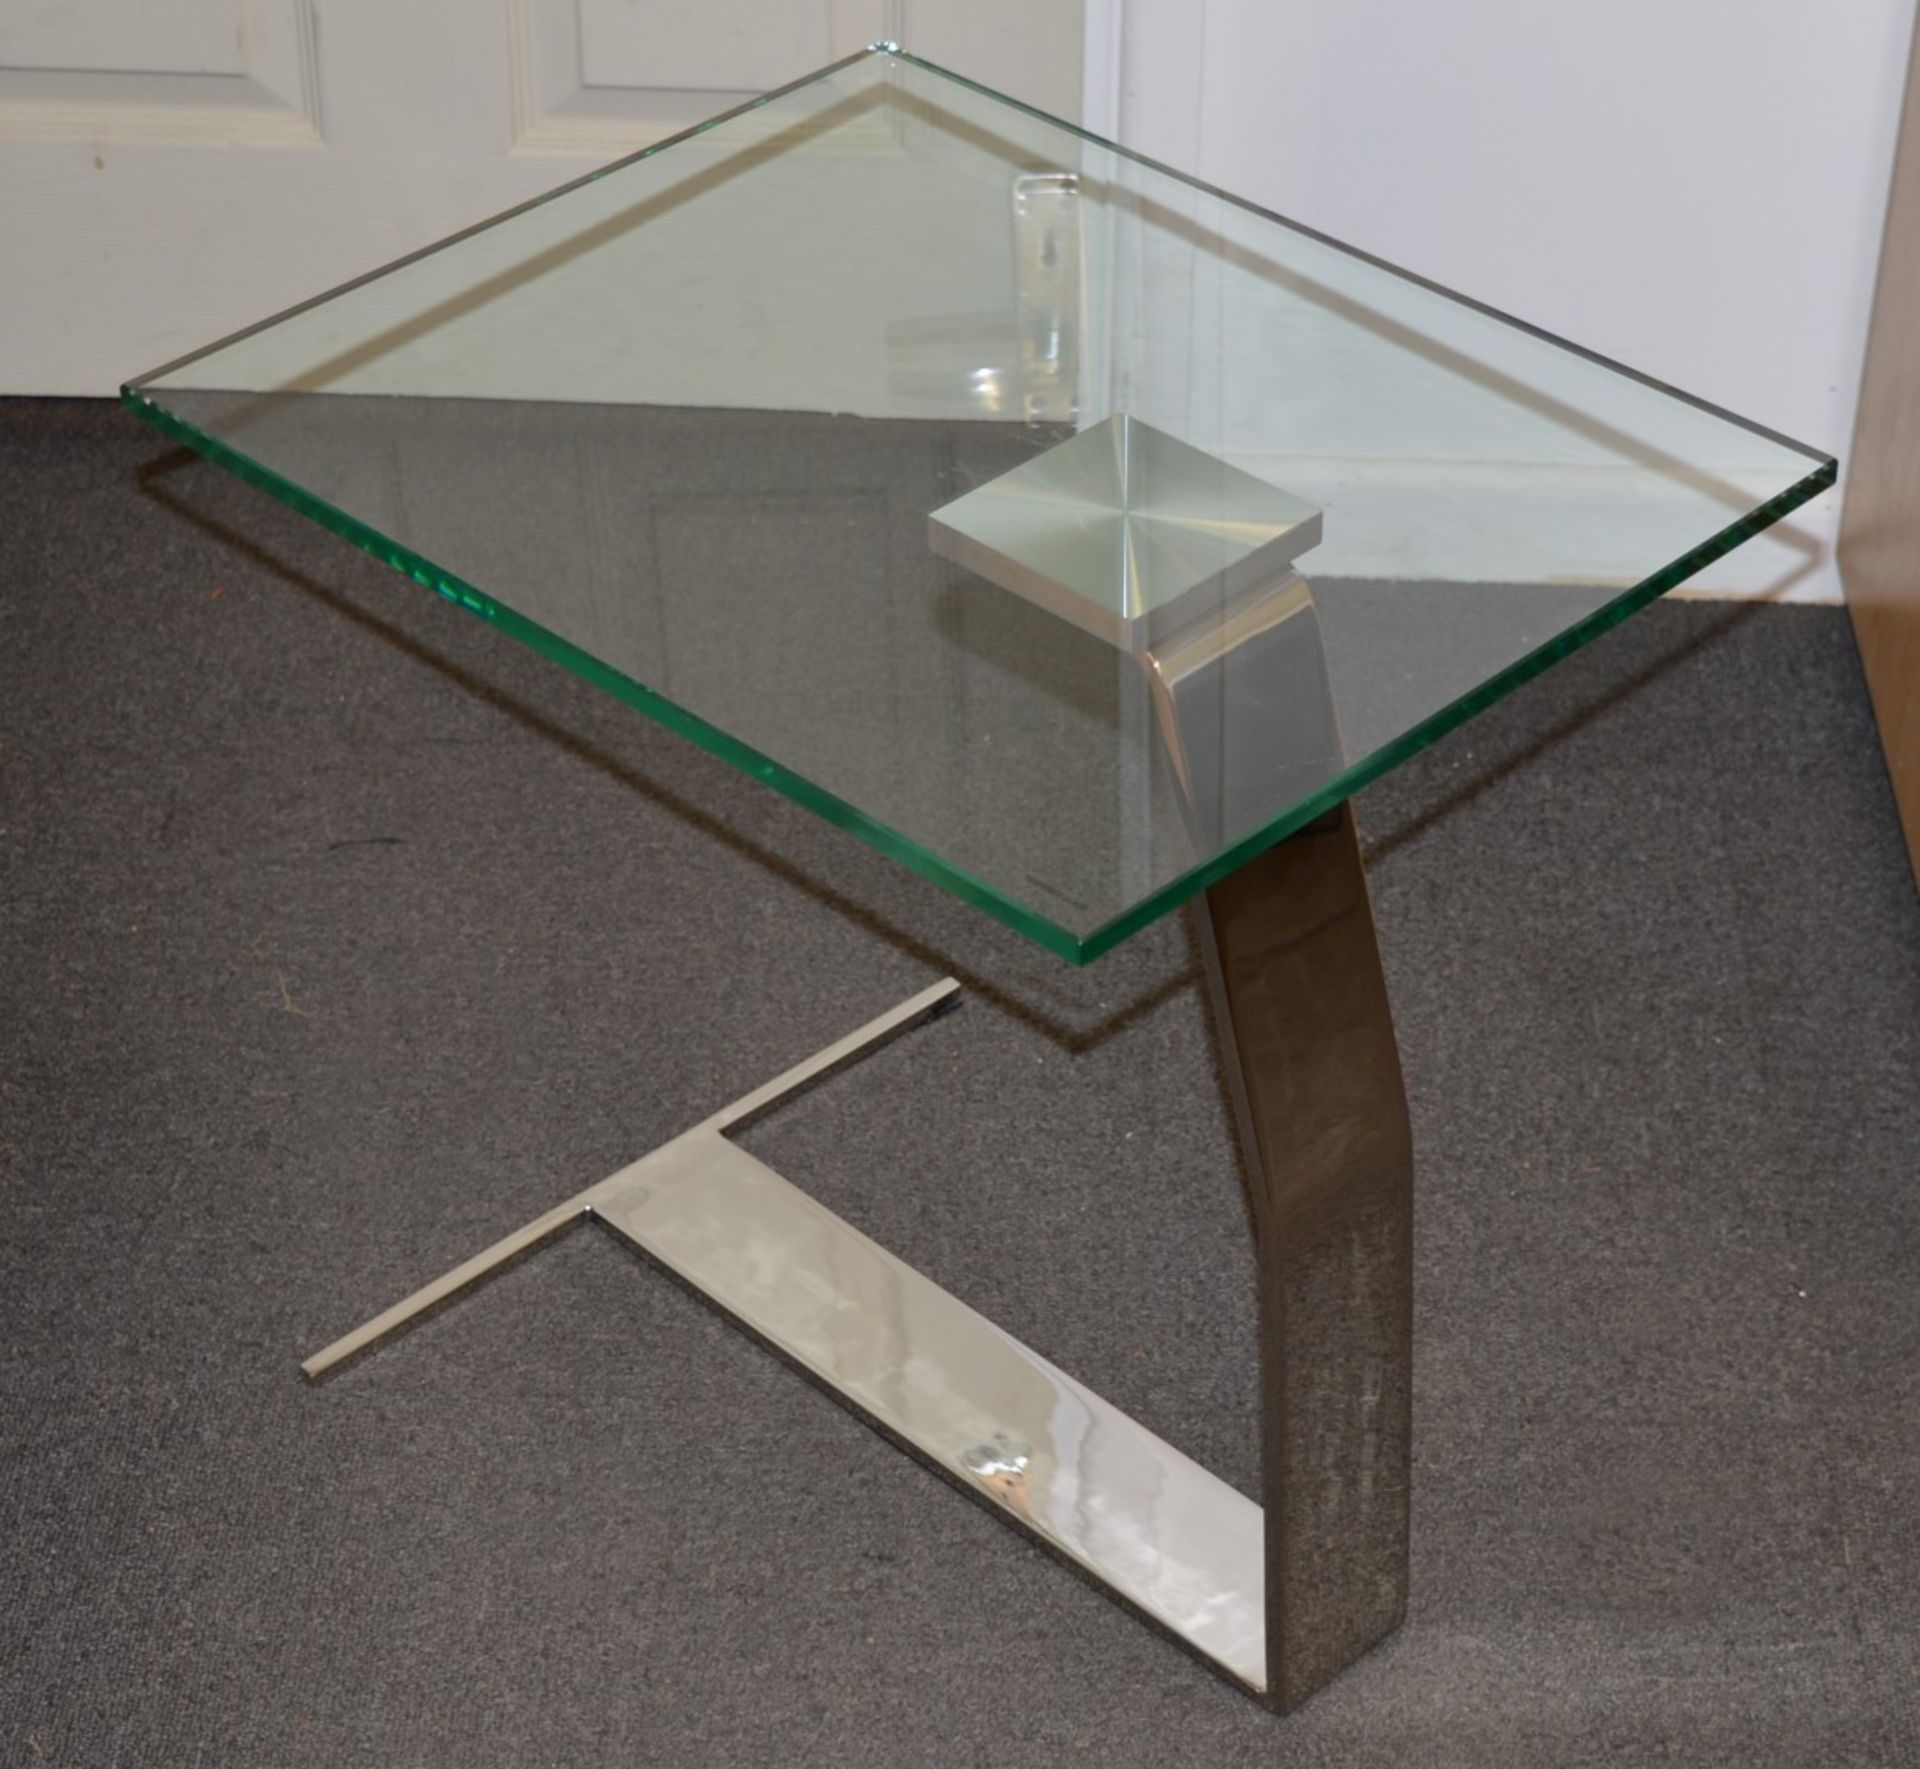 1 x Designer Chelsom Lamp Table - CL081 - Chrome Base With Clear Tempered Glass Top - Stunning - Image 4 of 6